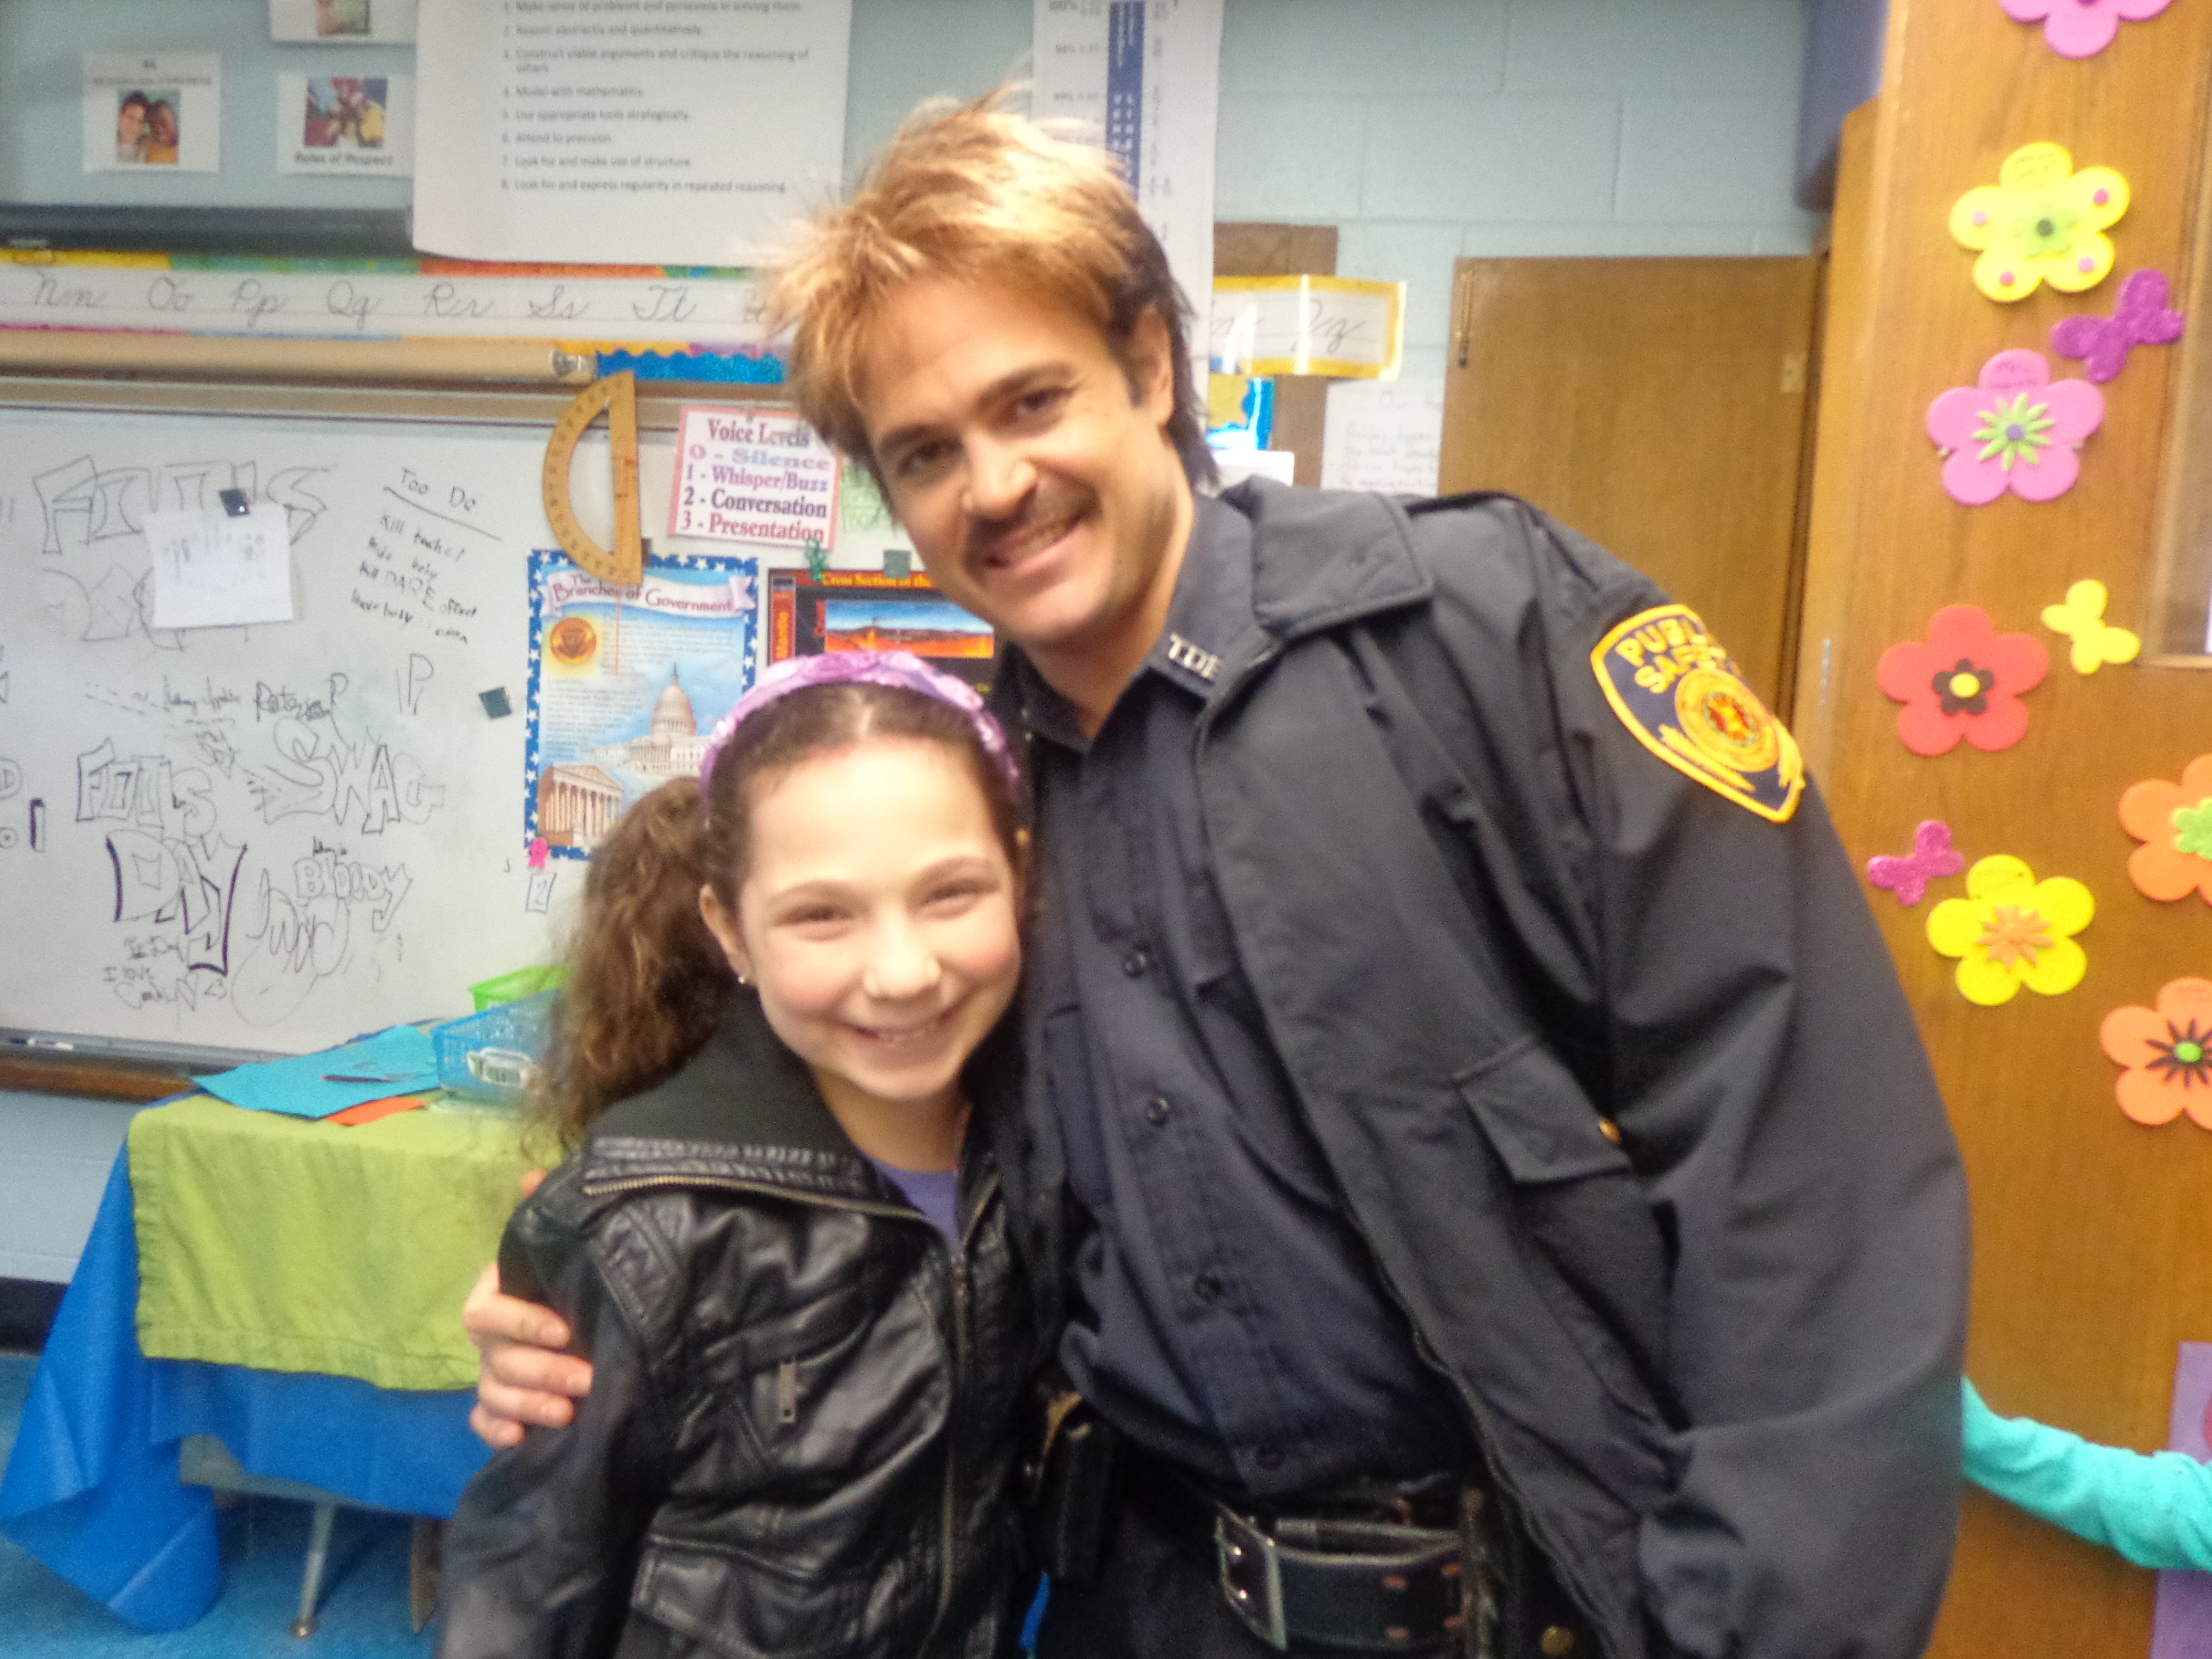 Rebecca with Mitchell Jarvis on set of the film 